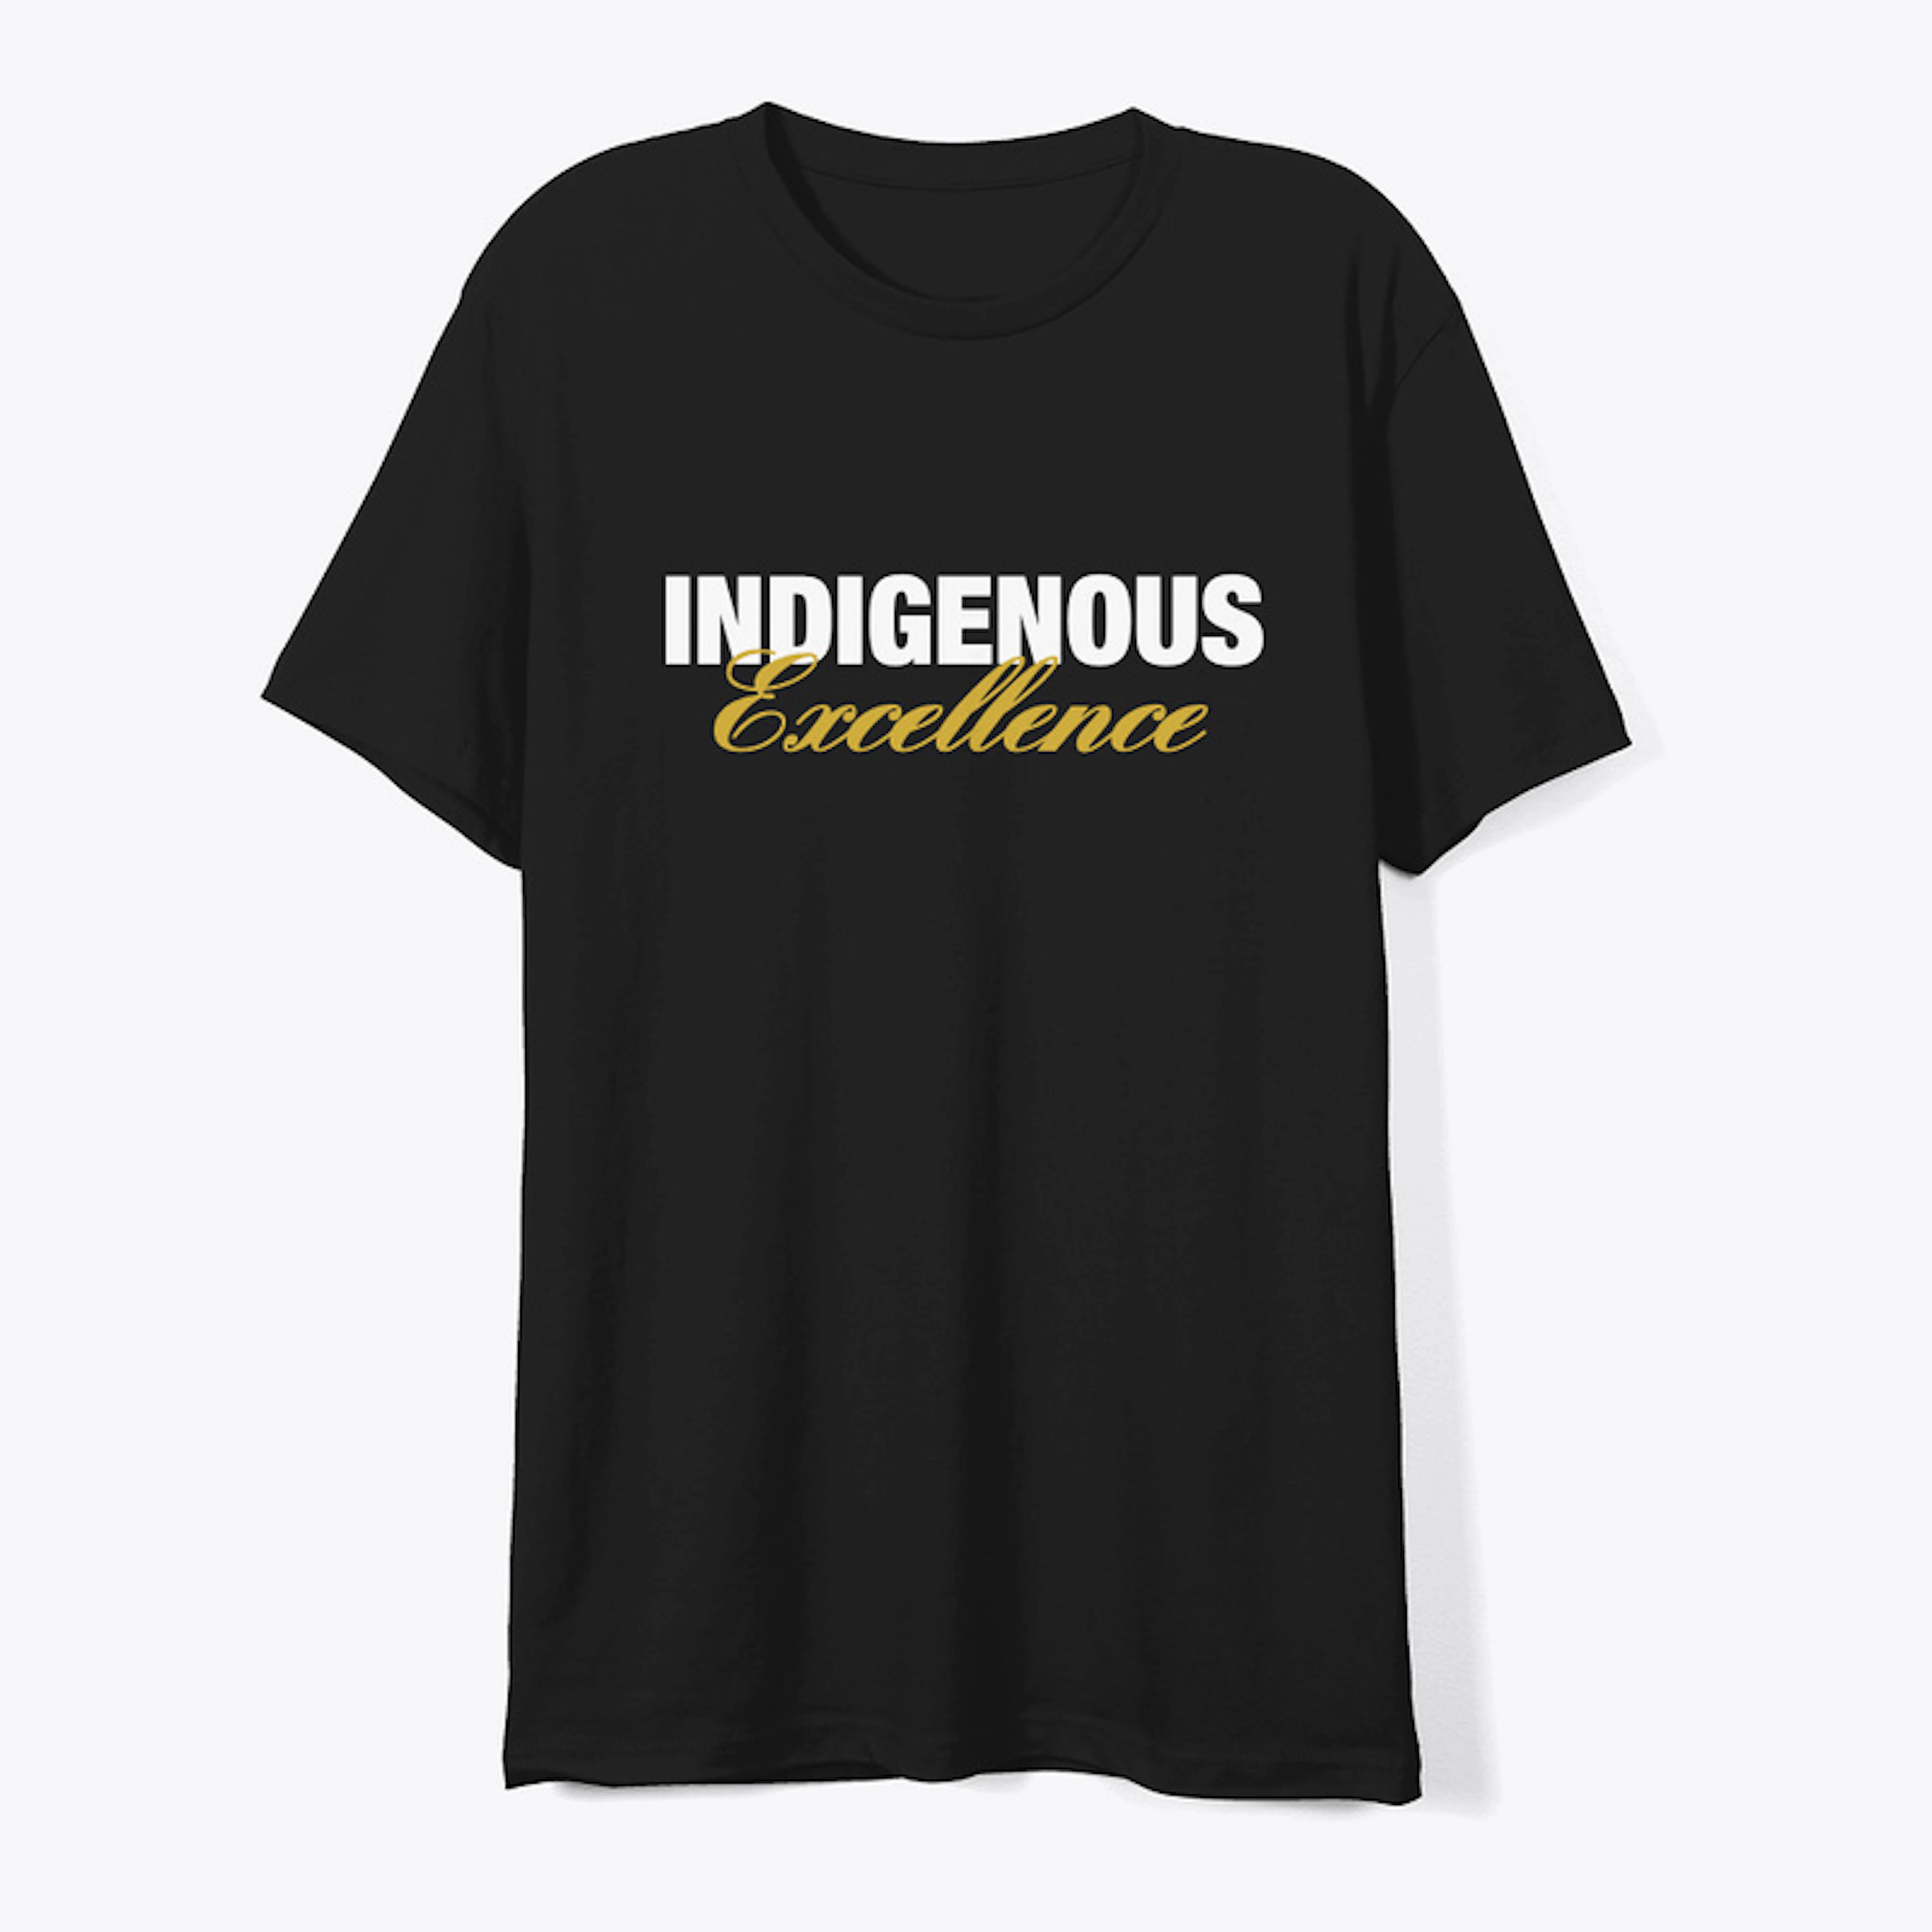 INDIGENOUS EXCELLENCE Tee